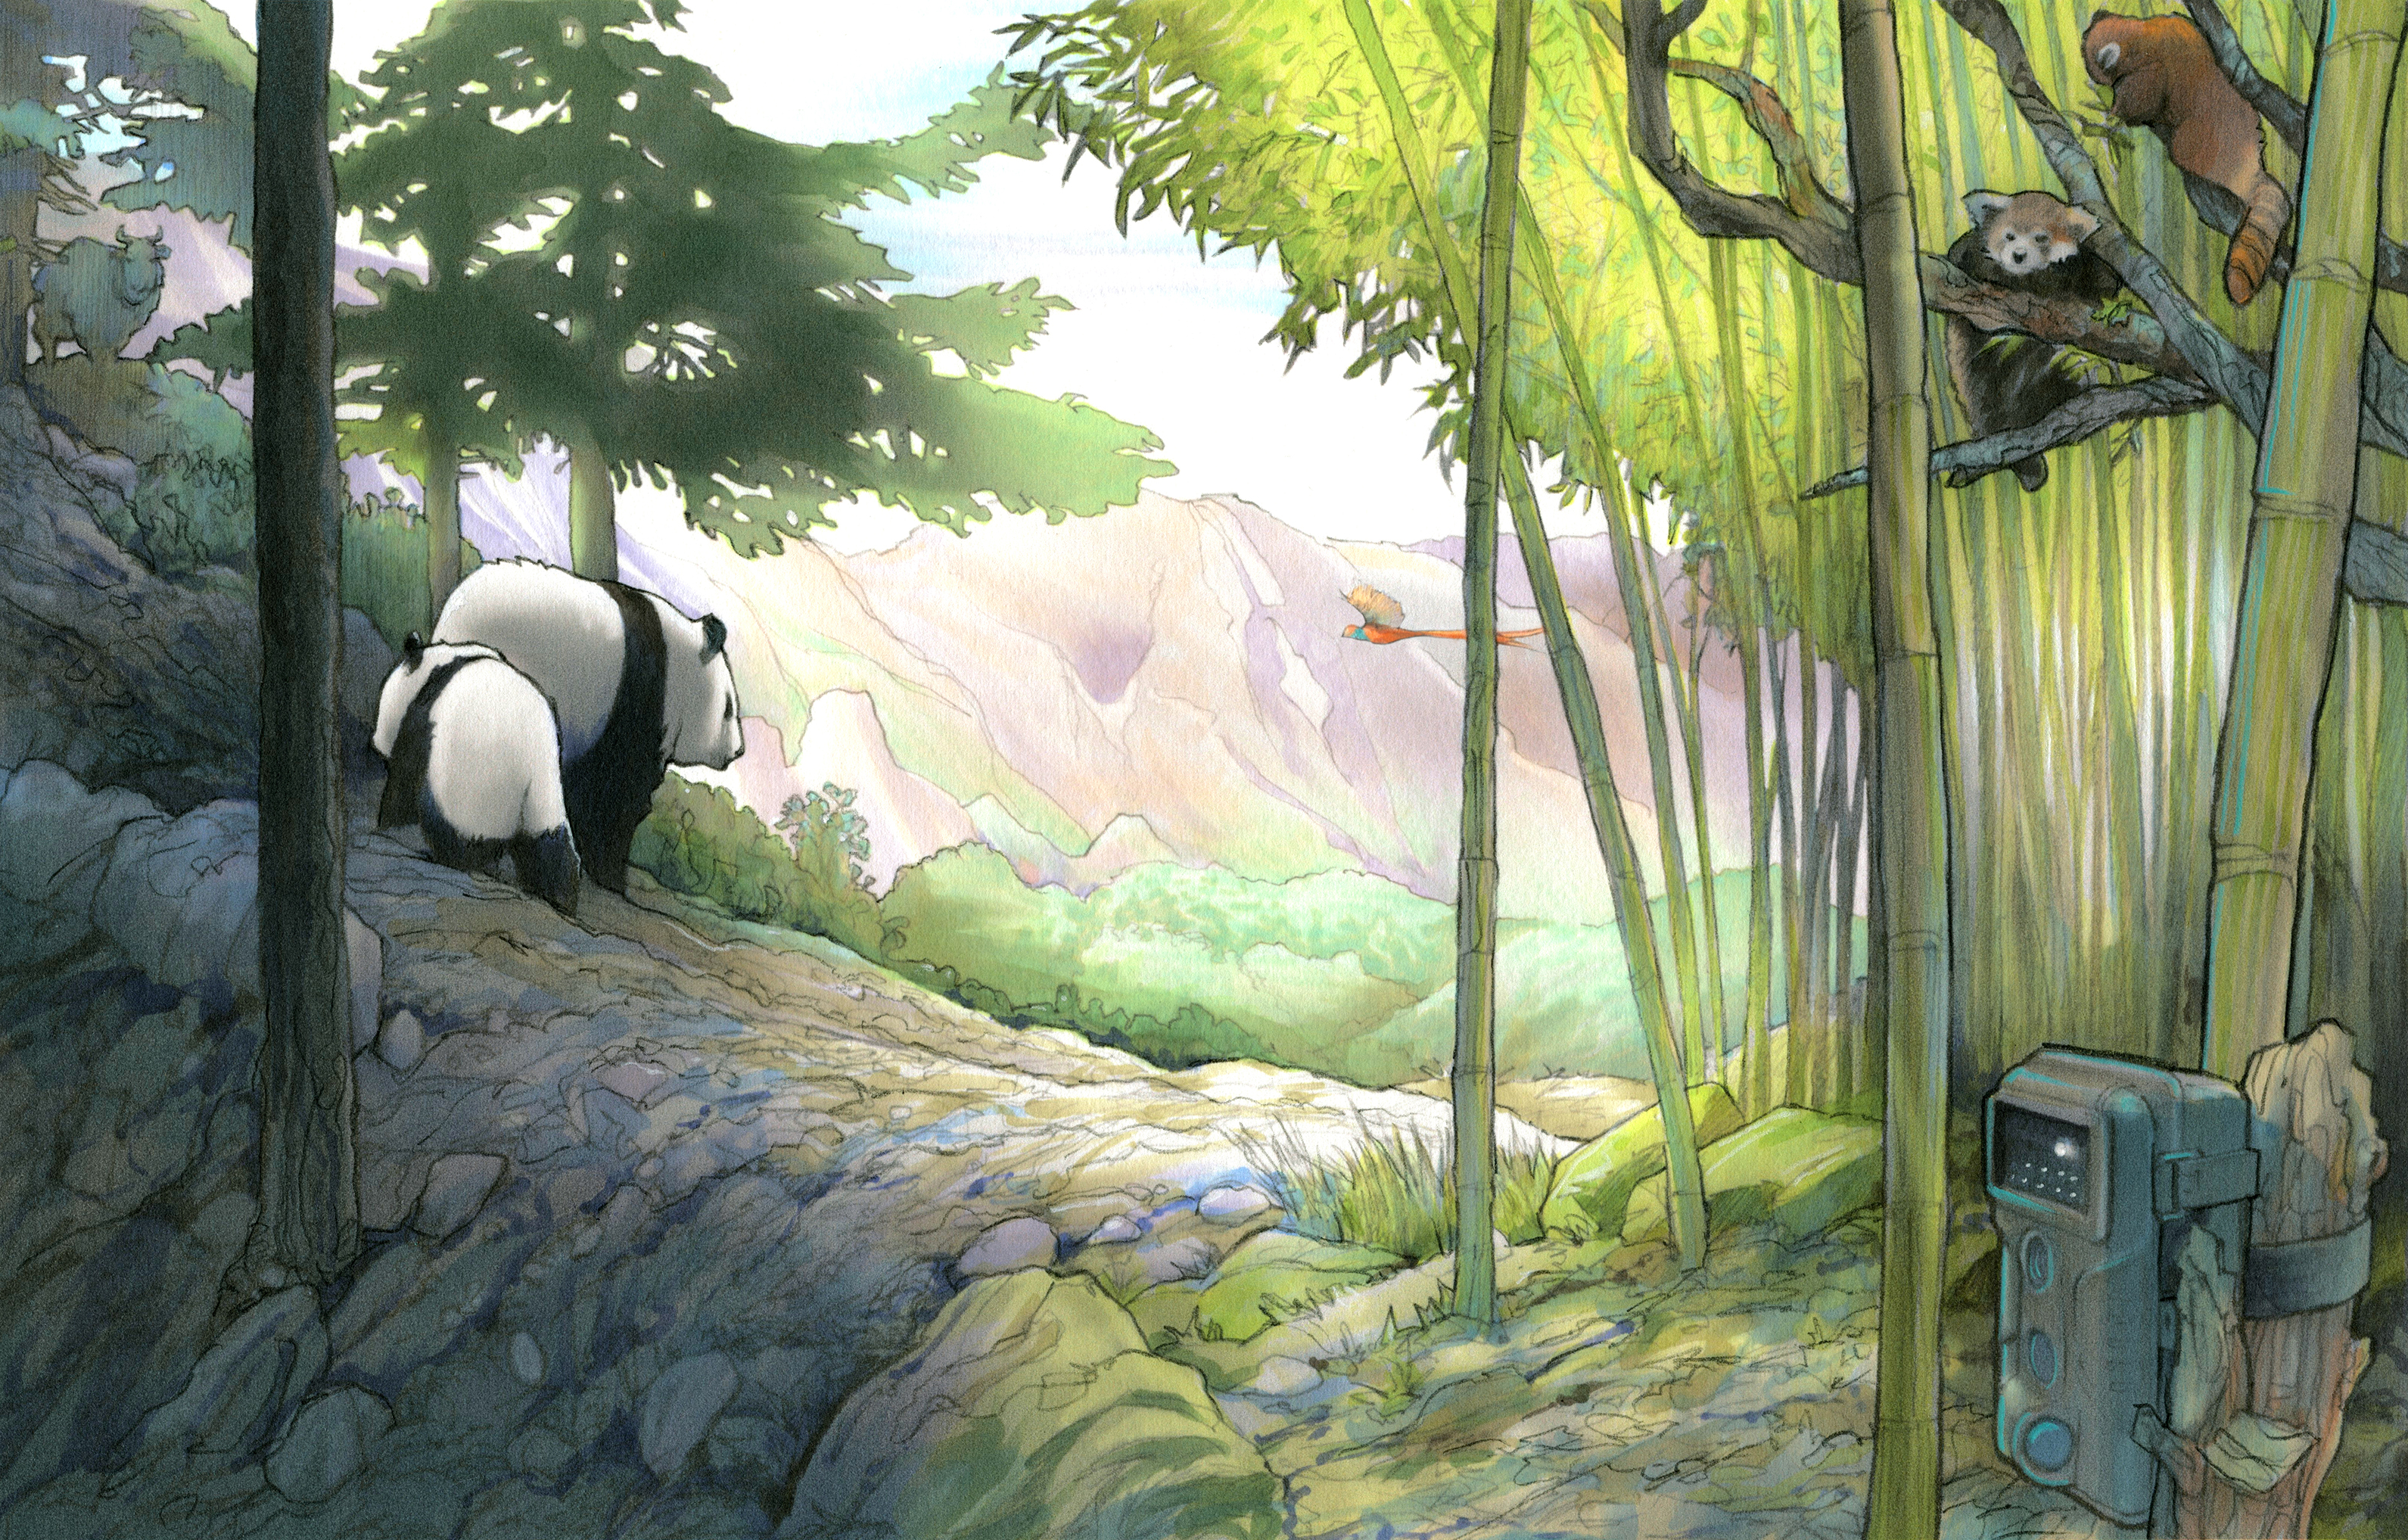 Illustration of two pandas in a bamboo-filled mountain forest. A camera trap is nearby.